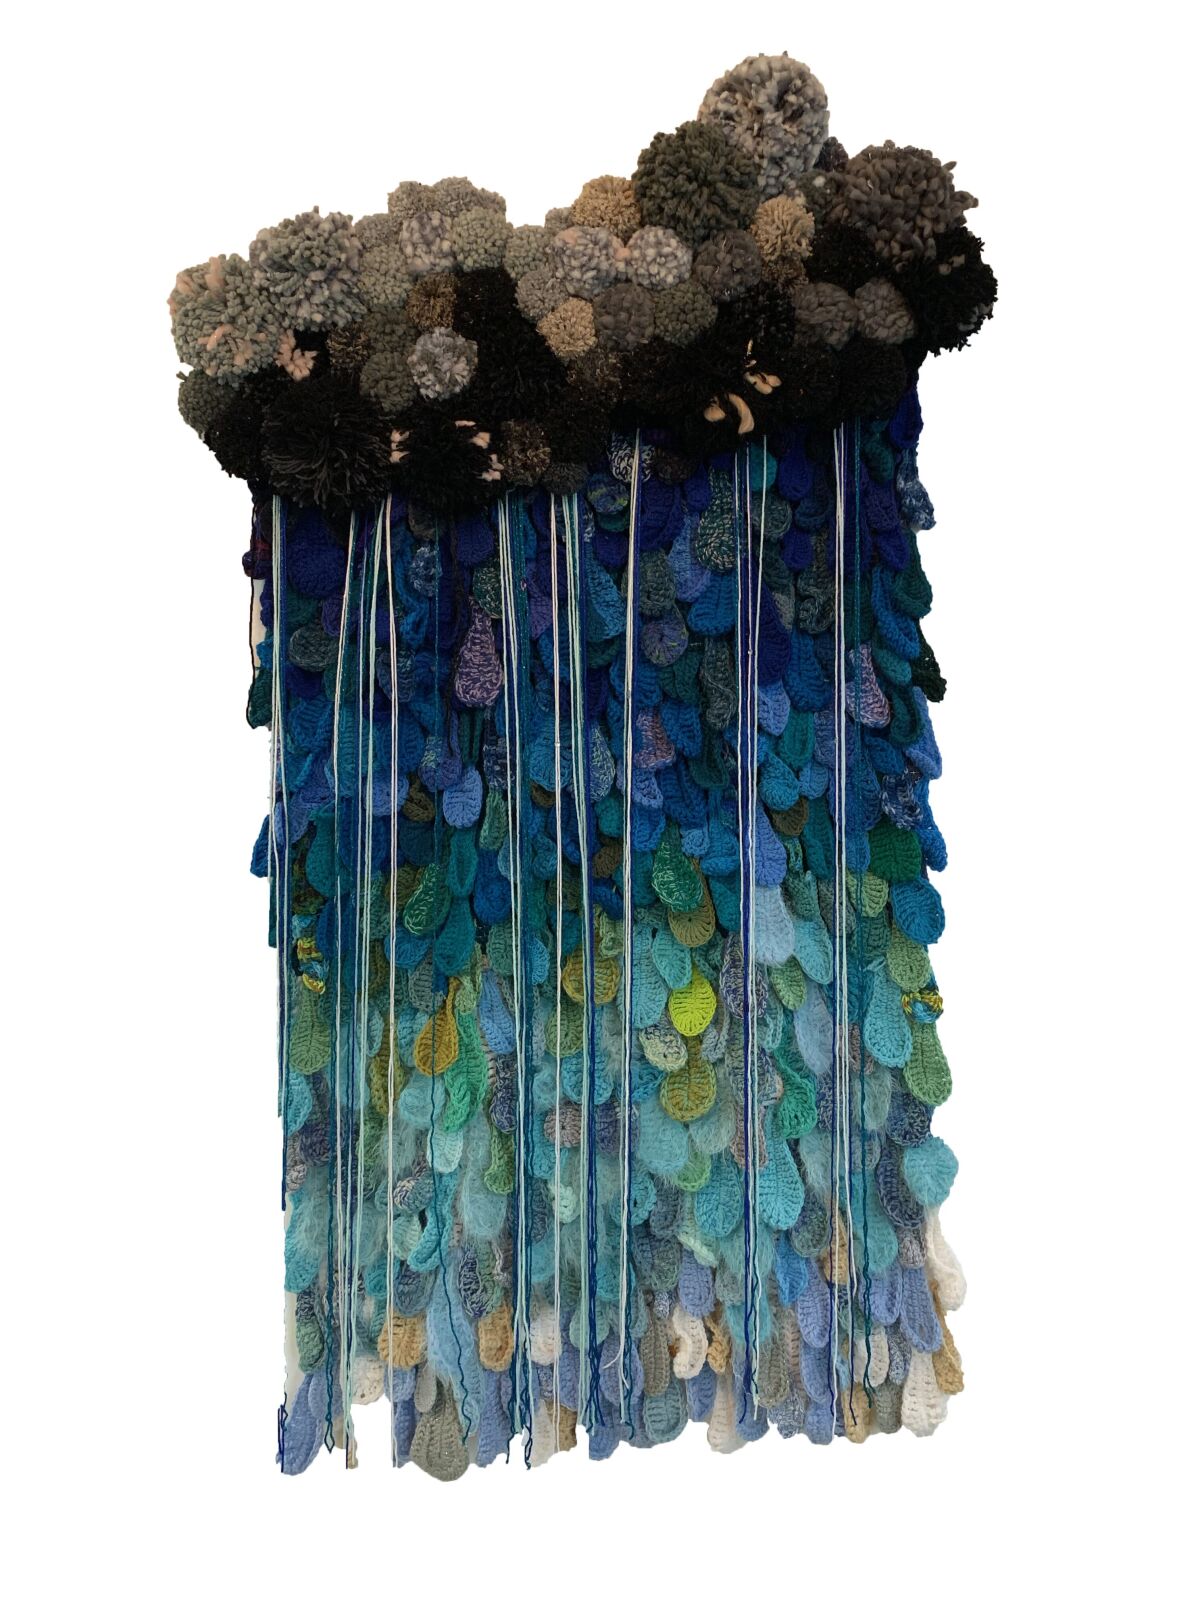 “Drips,” on display at Irvine’s WorkWell, is another piece made with recycled tears from their “Weeping Willow” project. It was inspired by Liz Flynn’s desire to create a blanket about “the feels.”